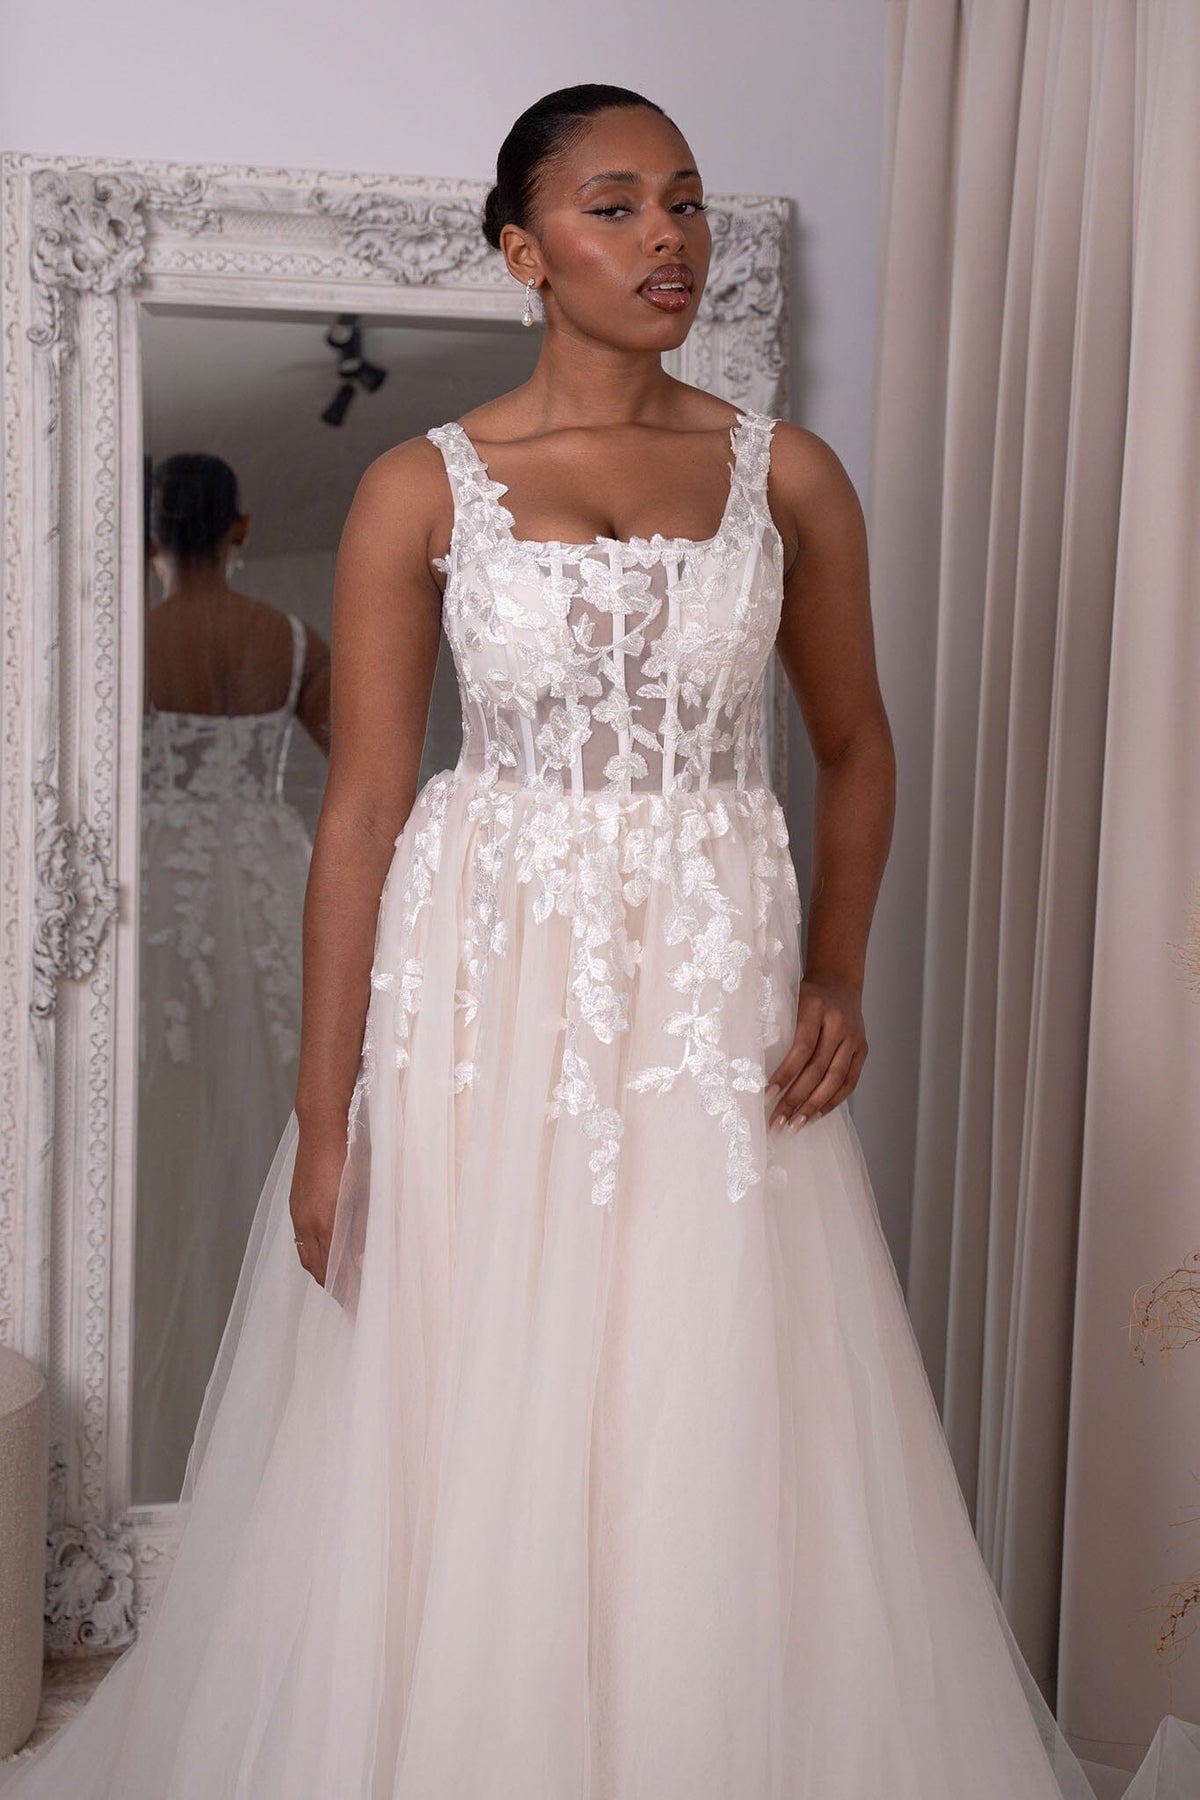 Ivory Off-White Square Neck A-line Lace Wedding Gown with Floral Lace Motifs Embellished on Layered Tulle and Trendy Exposed Bone Bodice